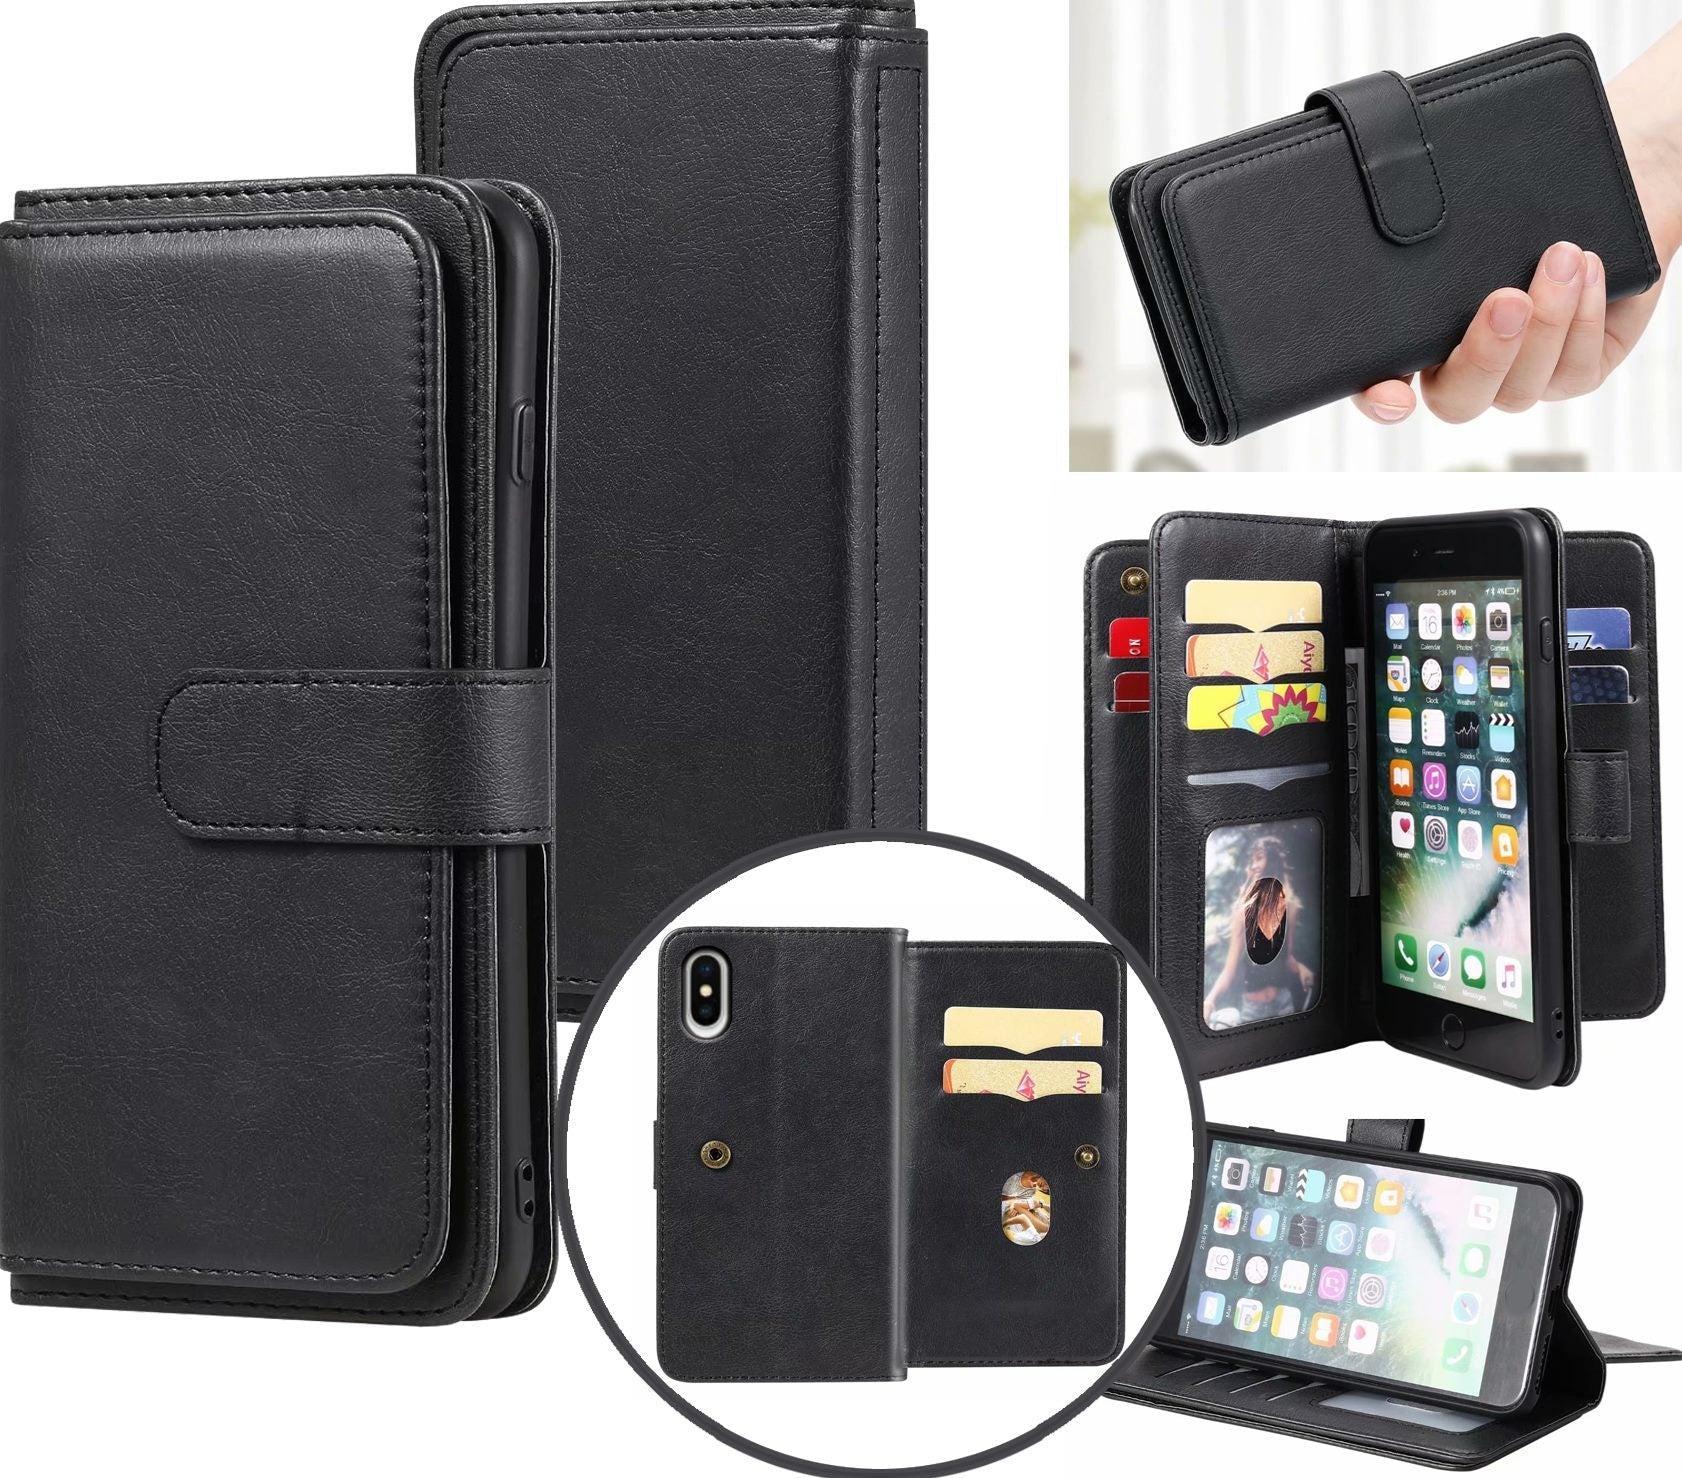 iPhone X Case Wallet Cover Black